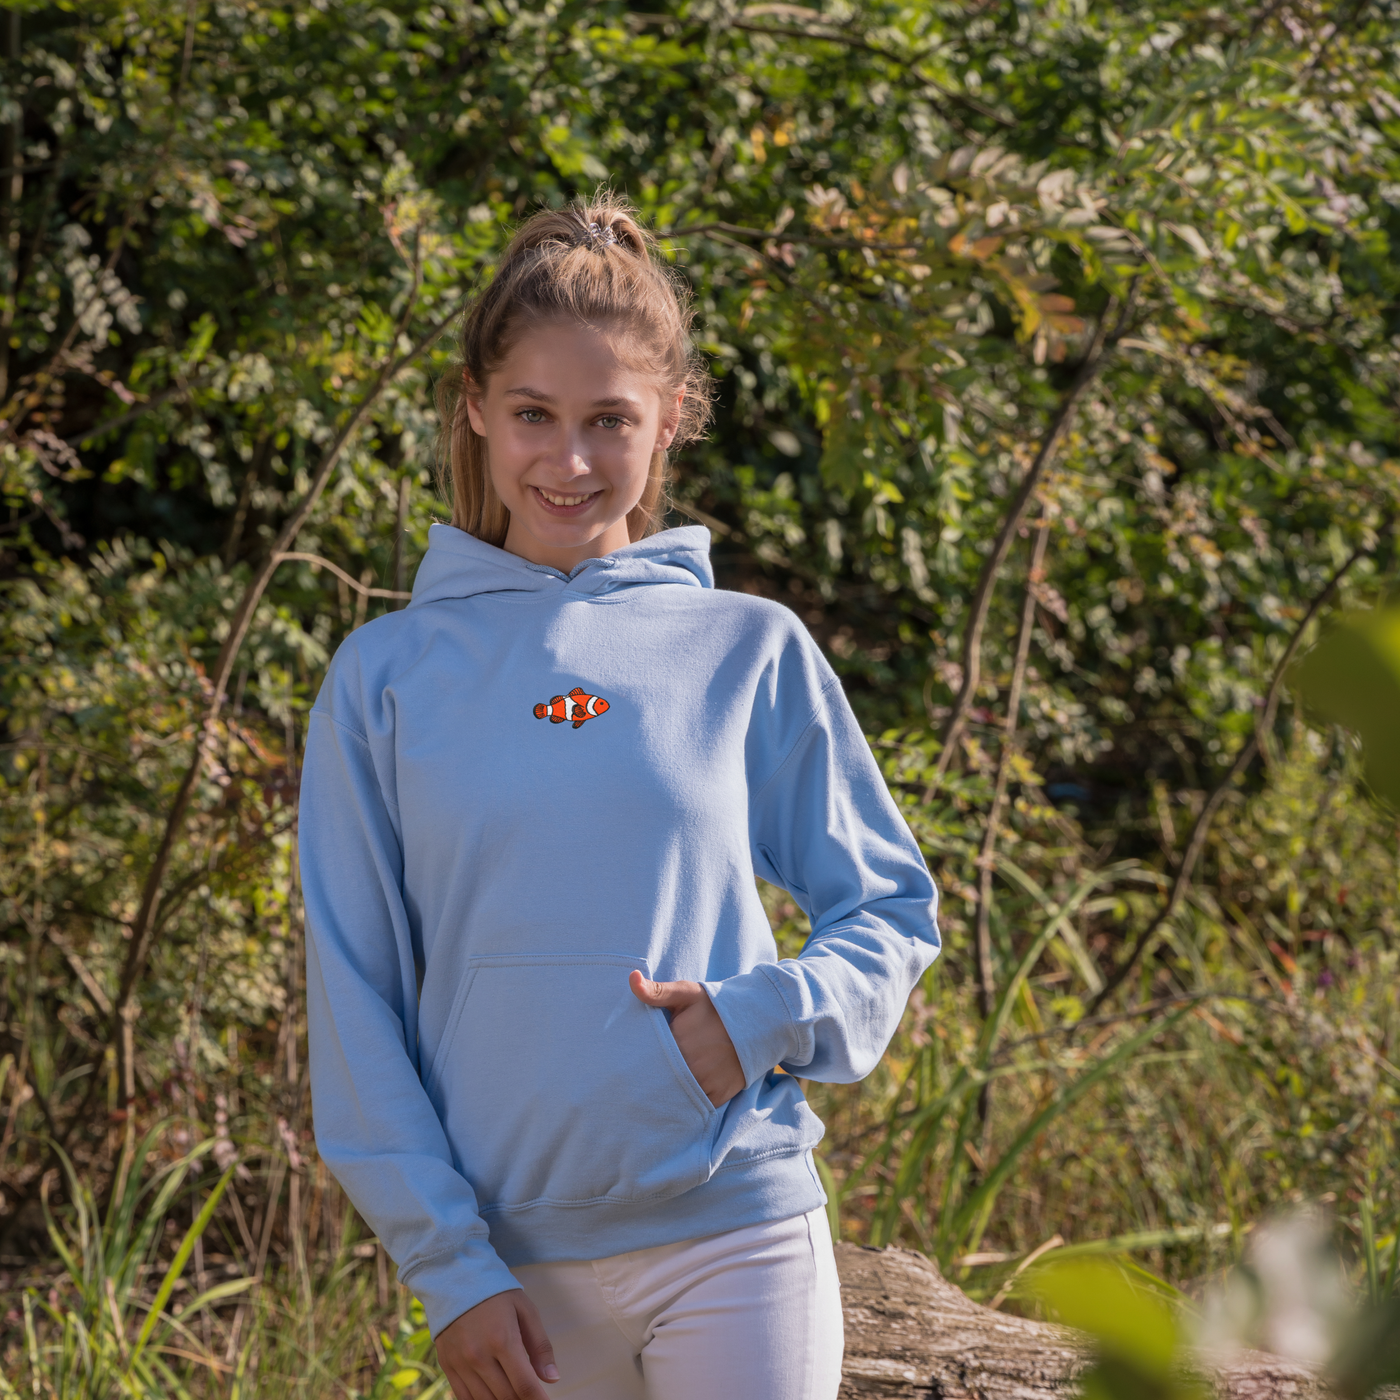 Bobby's Planet Women's Embroidered Clownfish Hoodie from Seven Seas Fish Animals Collection in Light Blue Color#color_light-blue